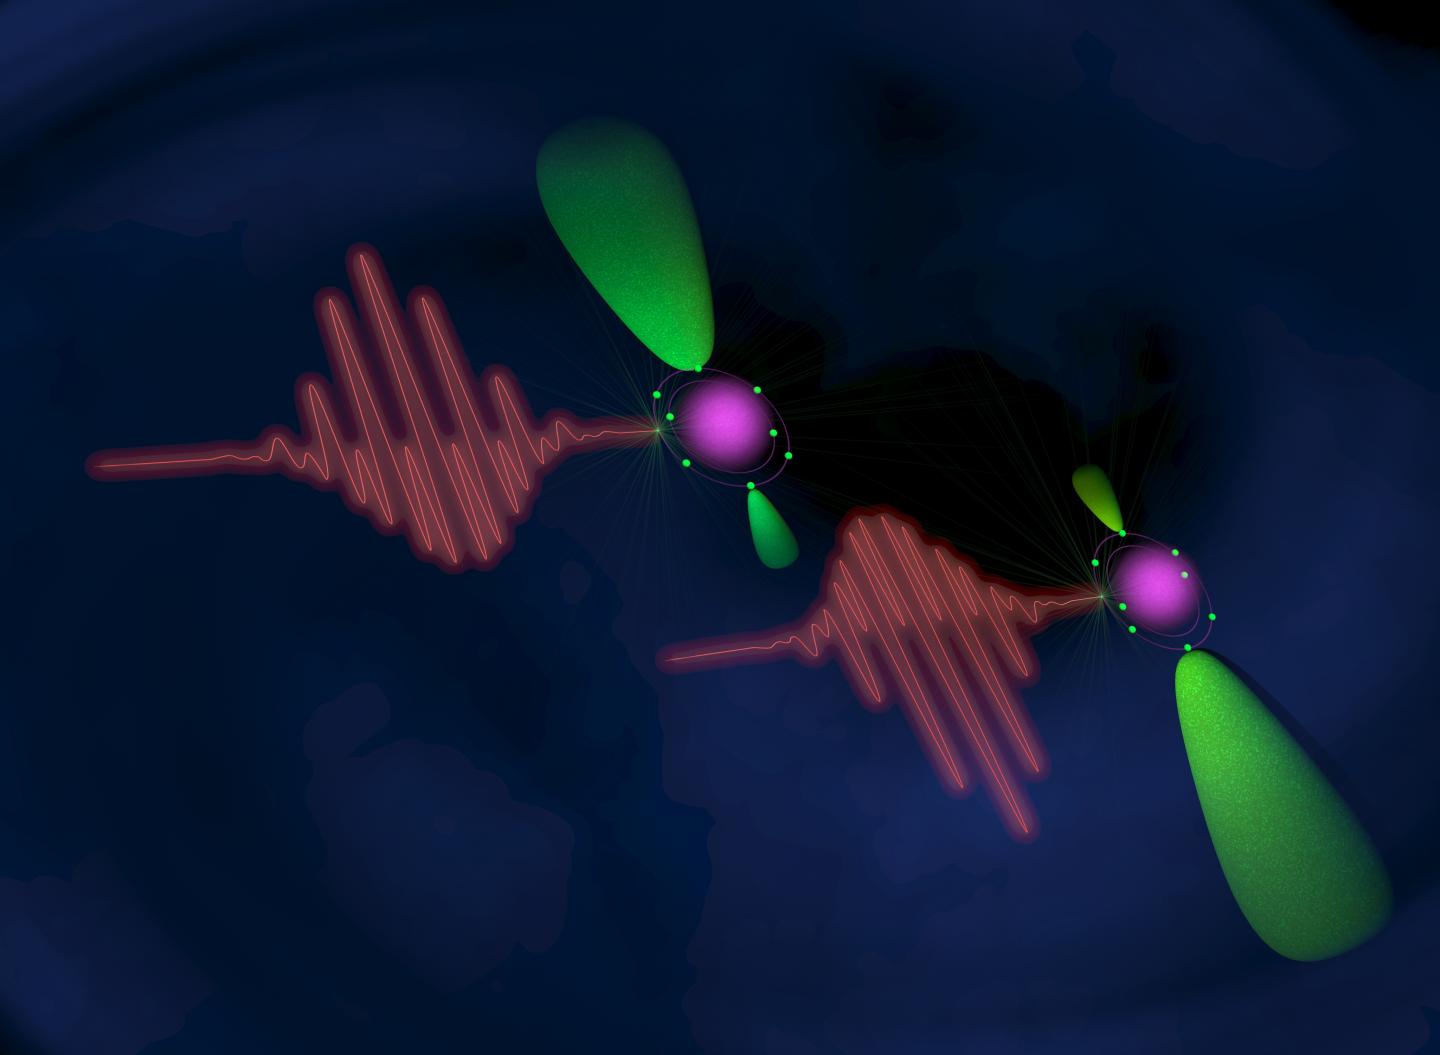 Controlling Ultrafast Electrons in Motion